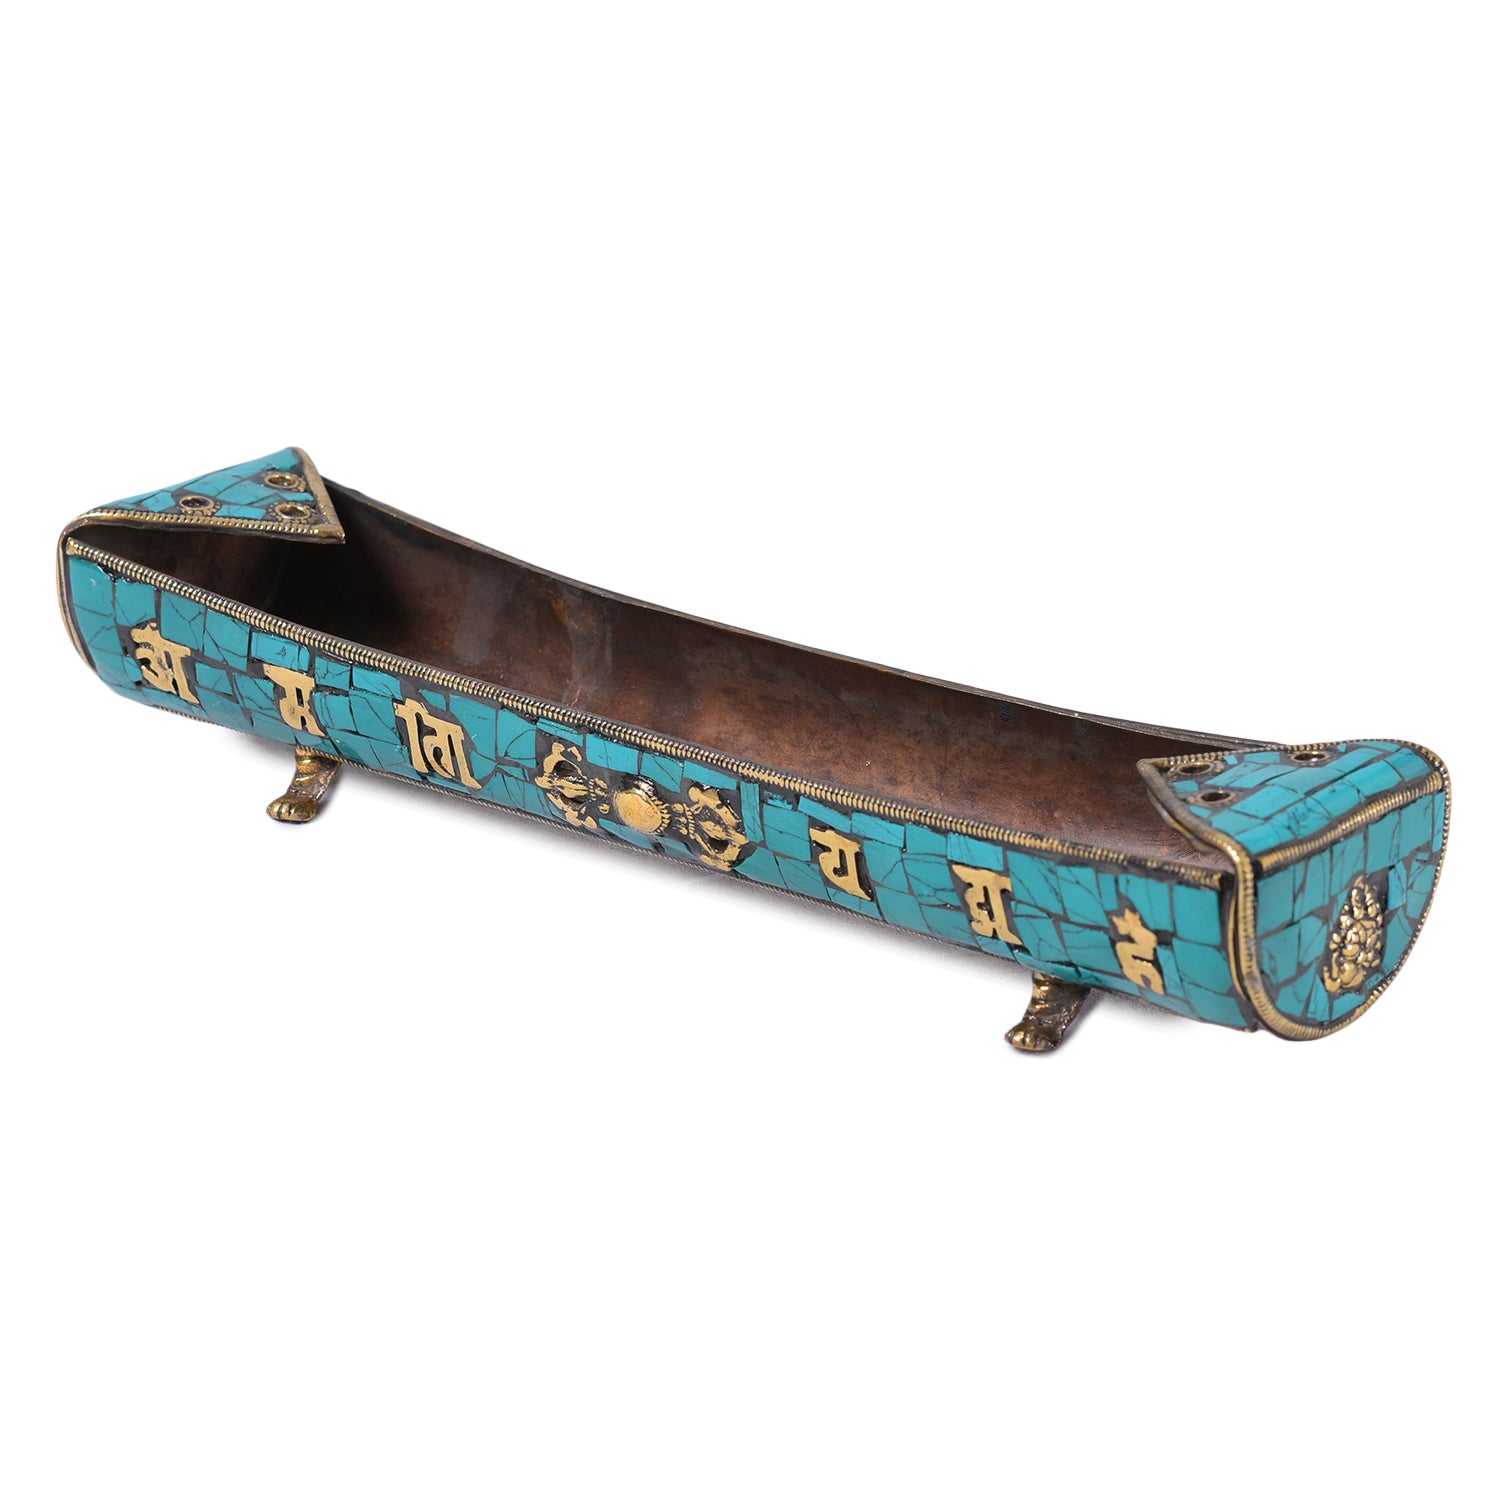 The Turquoise Boat - Incense Holder